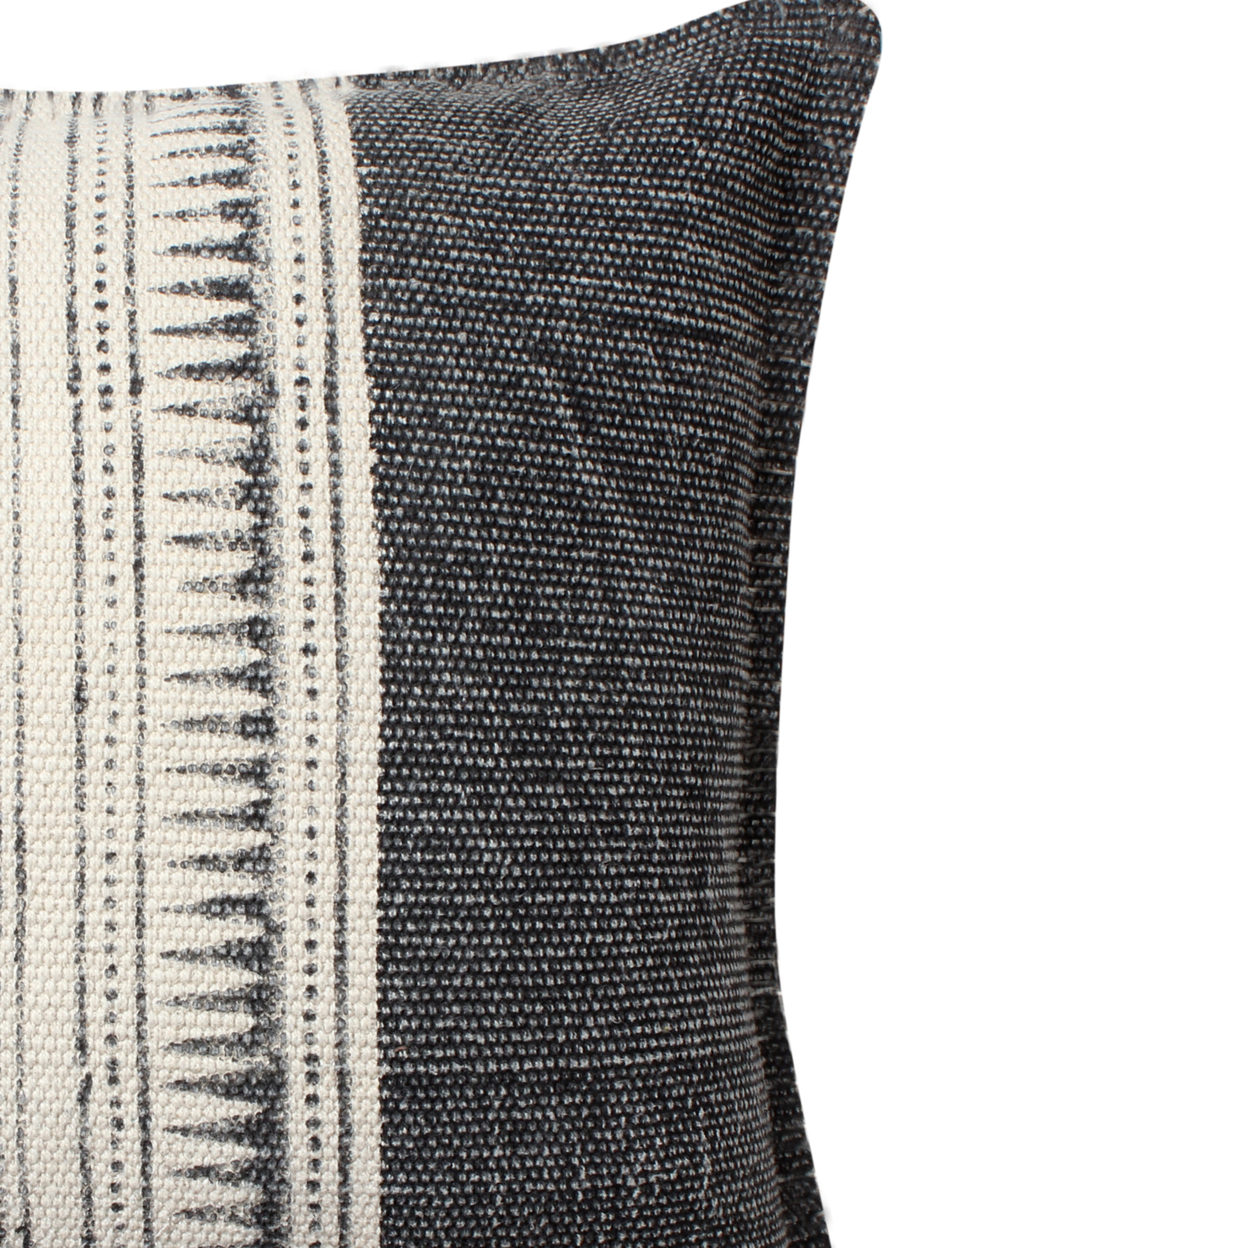 18 X 18 Square Handwoven Accent Throw Pillow, Polycotton Dhurrie, Kilim Pattern Front, Set Of 2, White, Gray